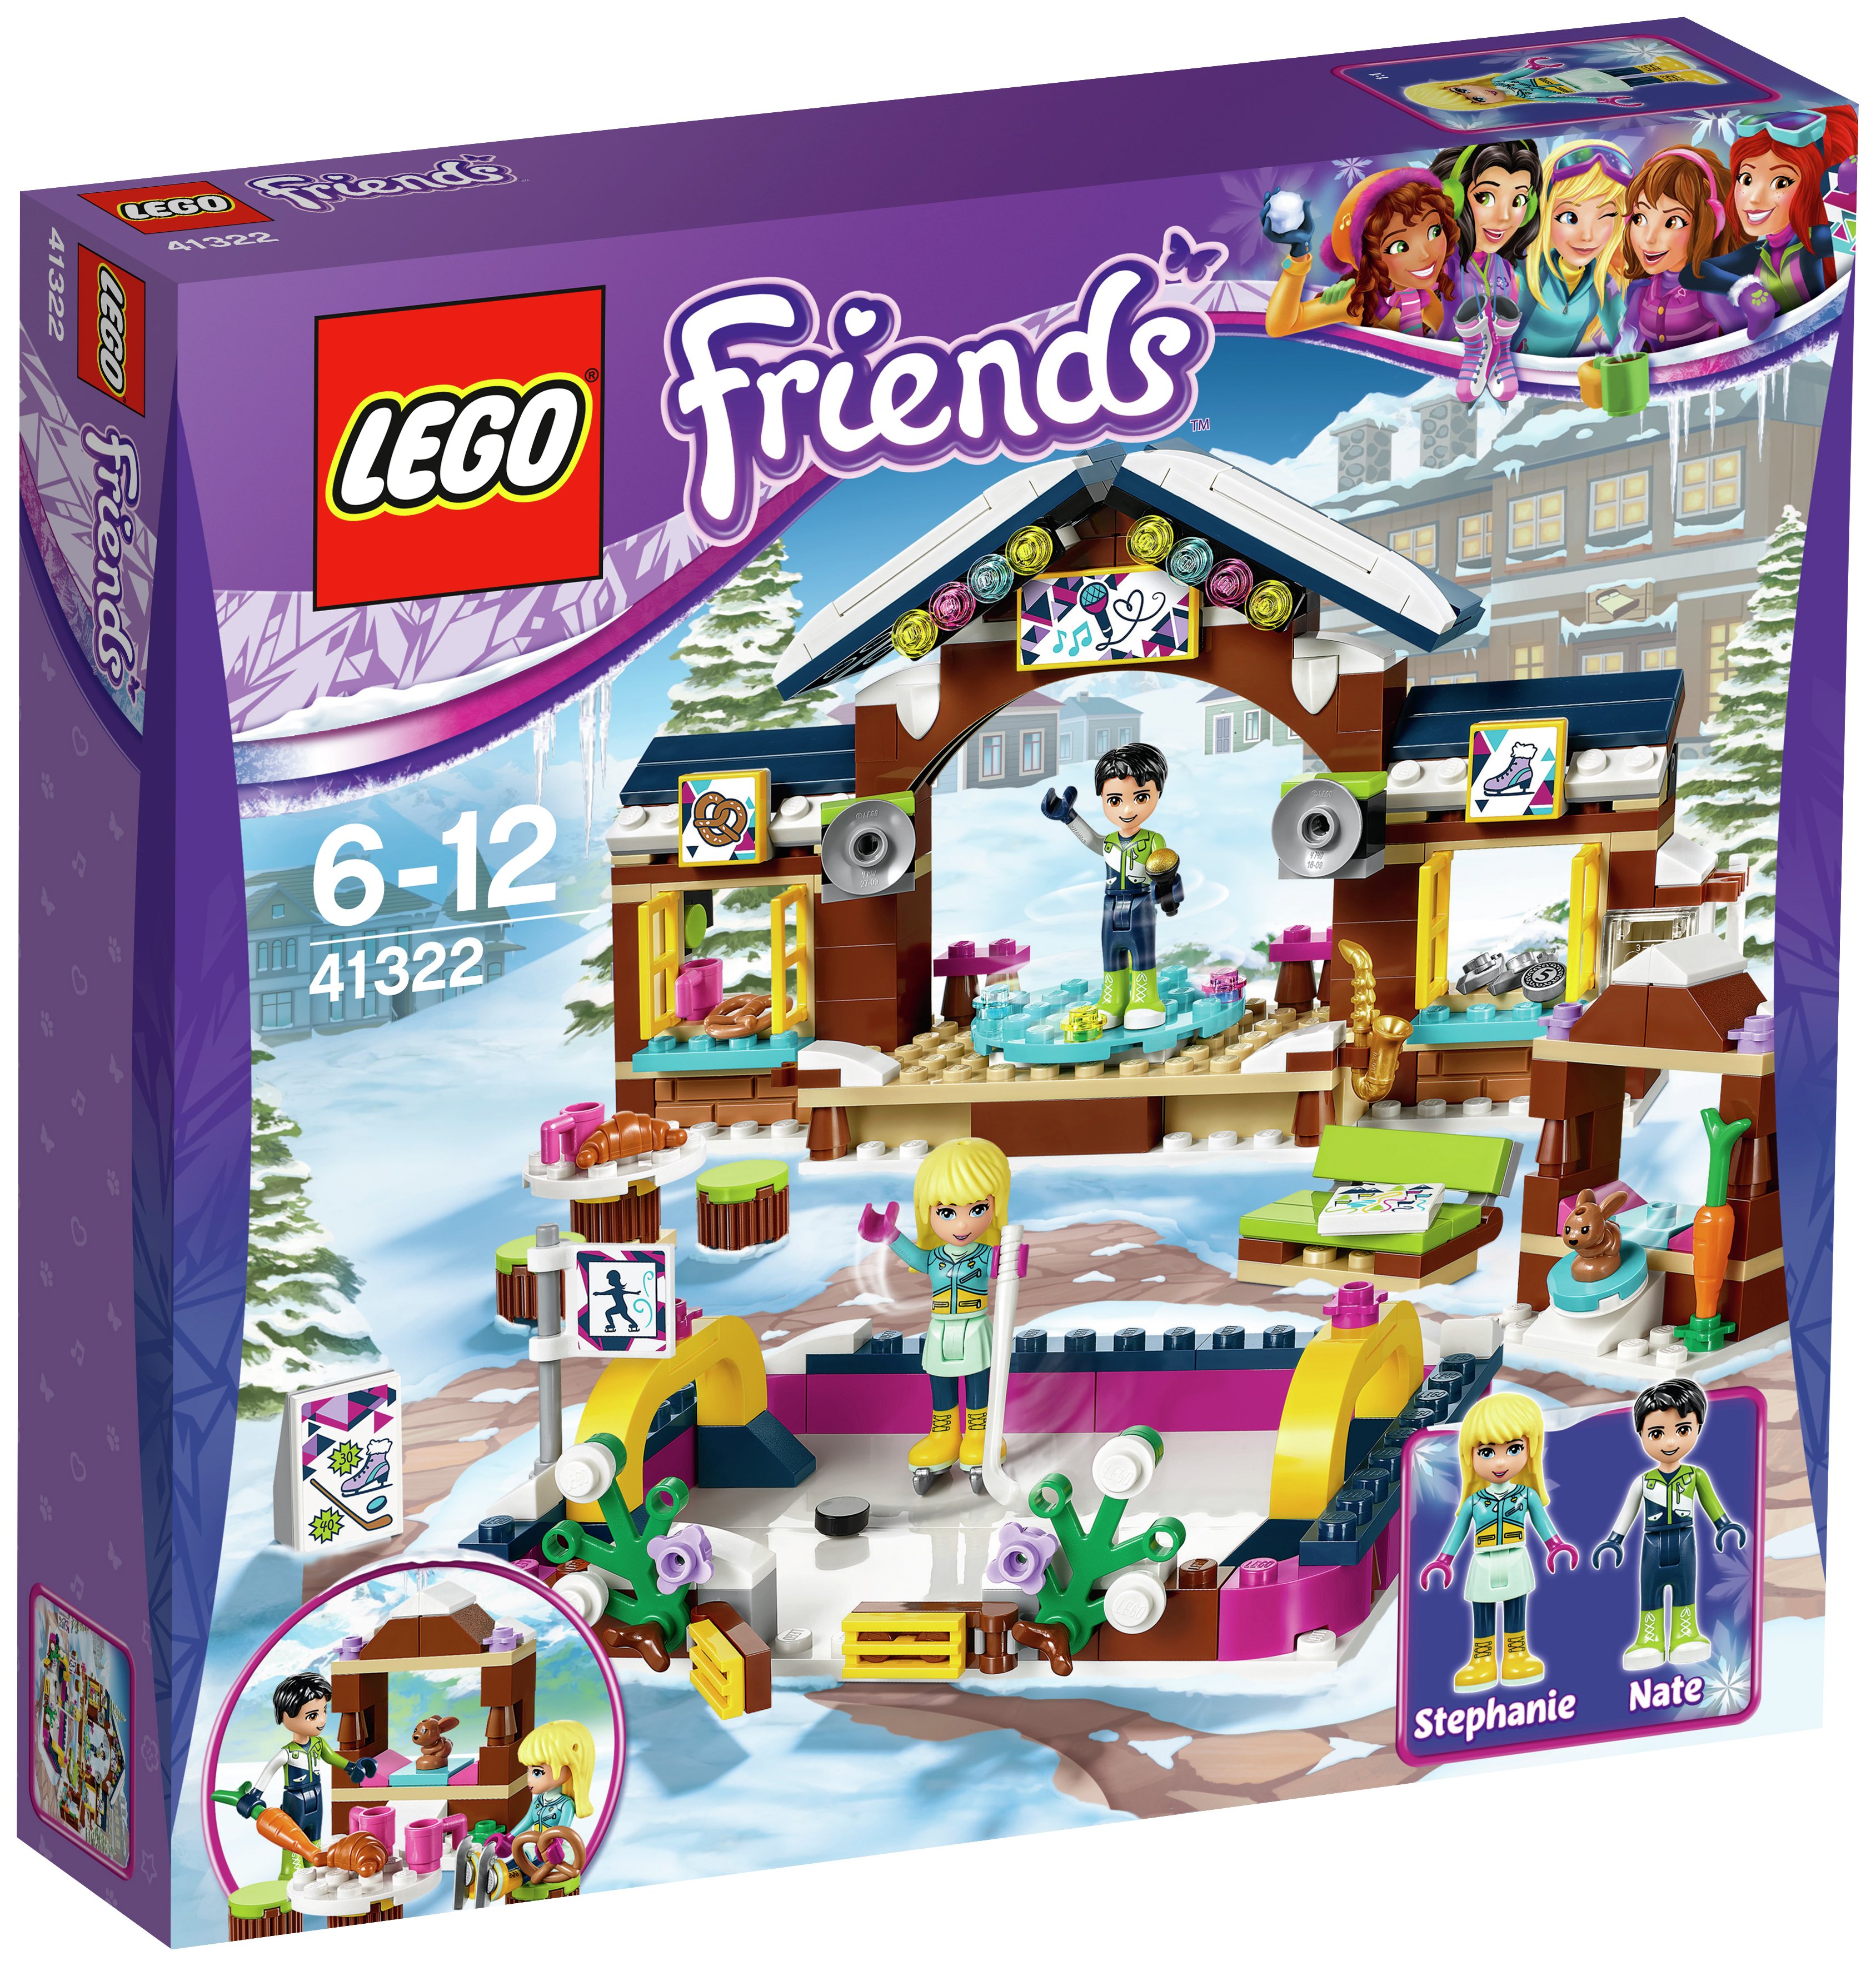 LEGO Friends Snow Resort Ice Rink - 41322. Review